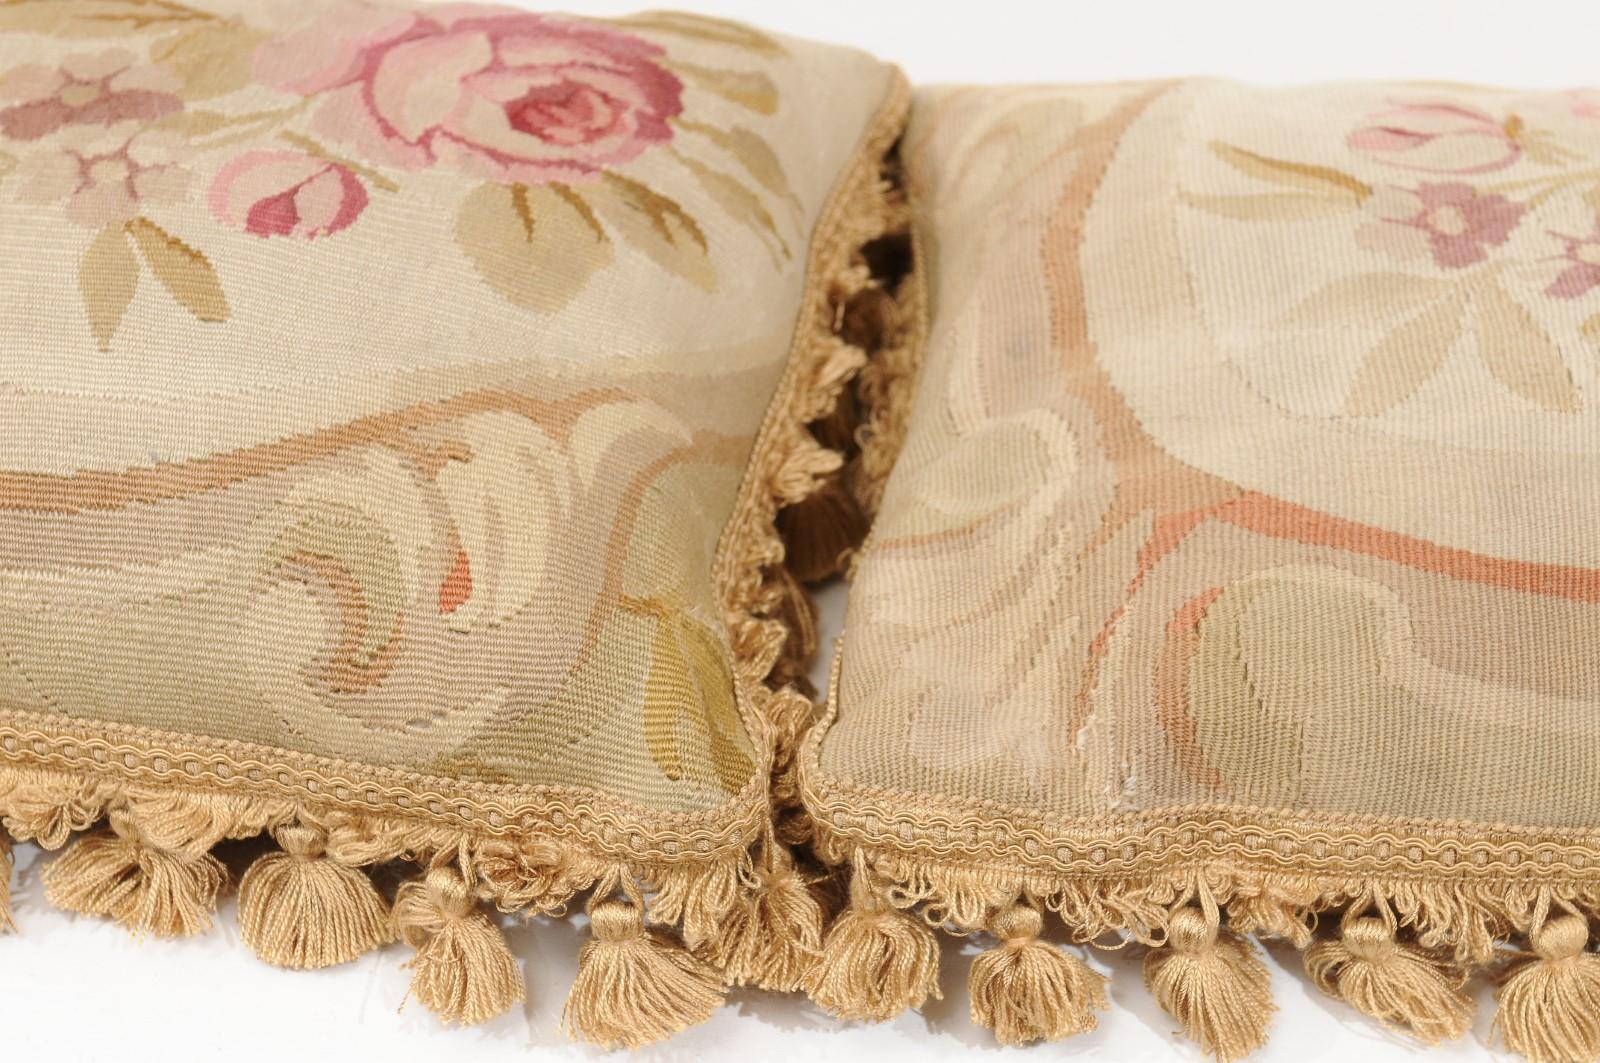 French 19th Century Aubusson Woven Tapestry Pillow with Roses and Tassels For Sale 7